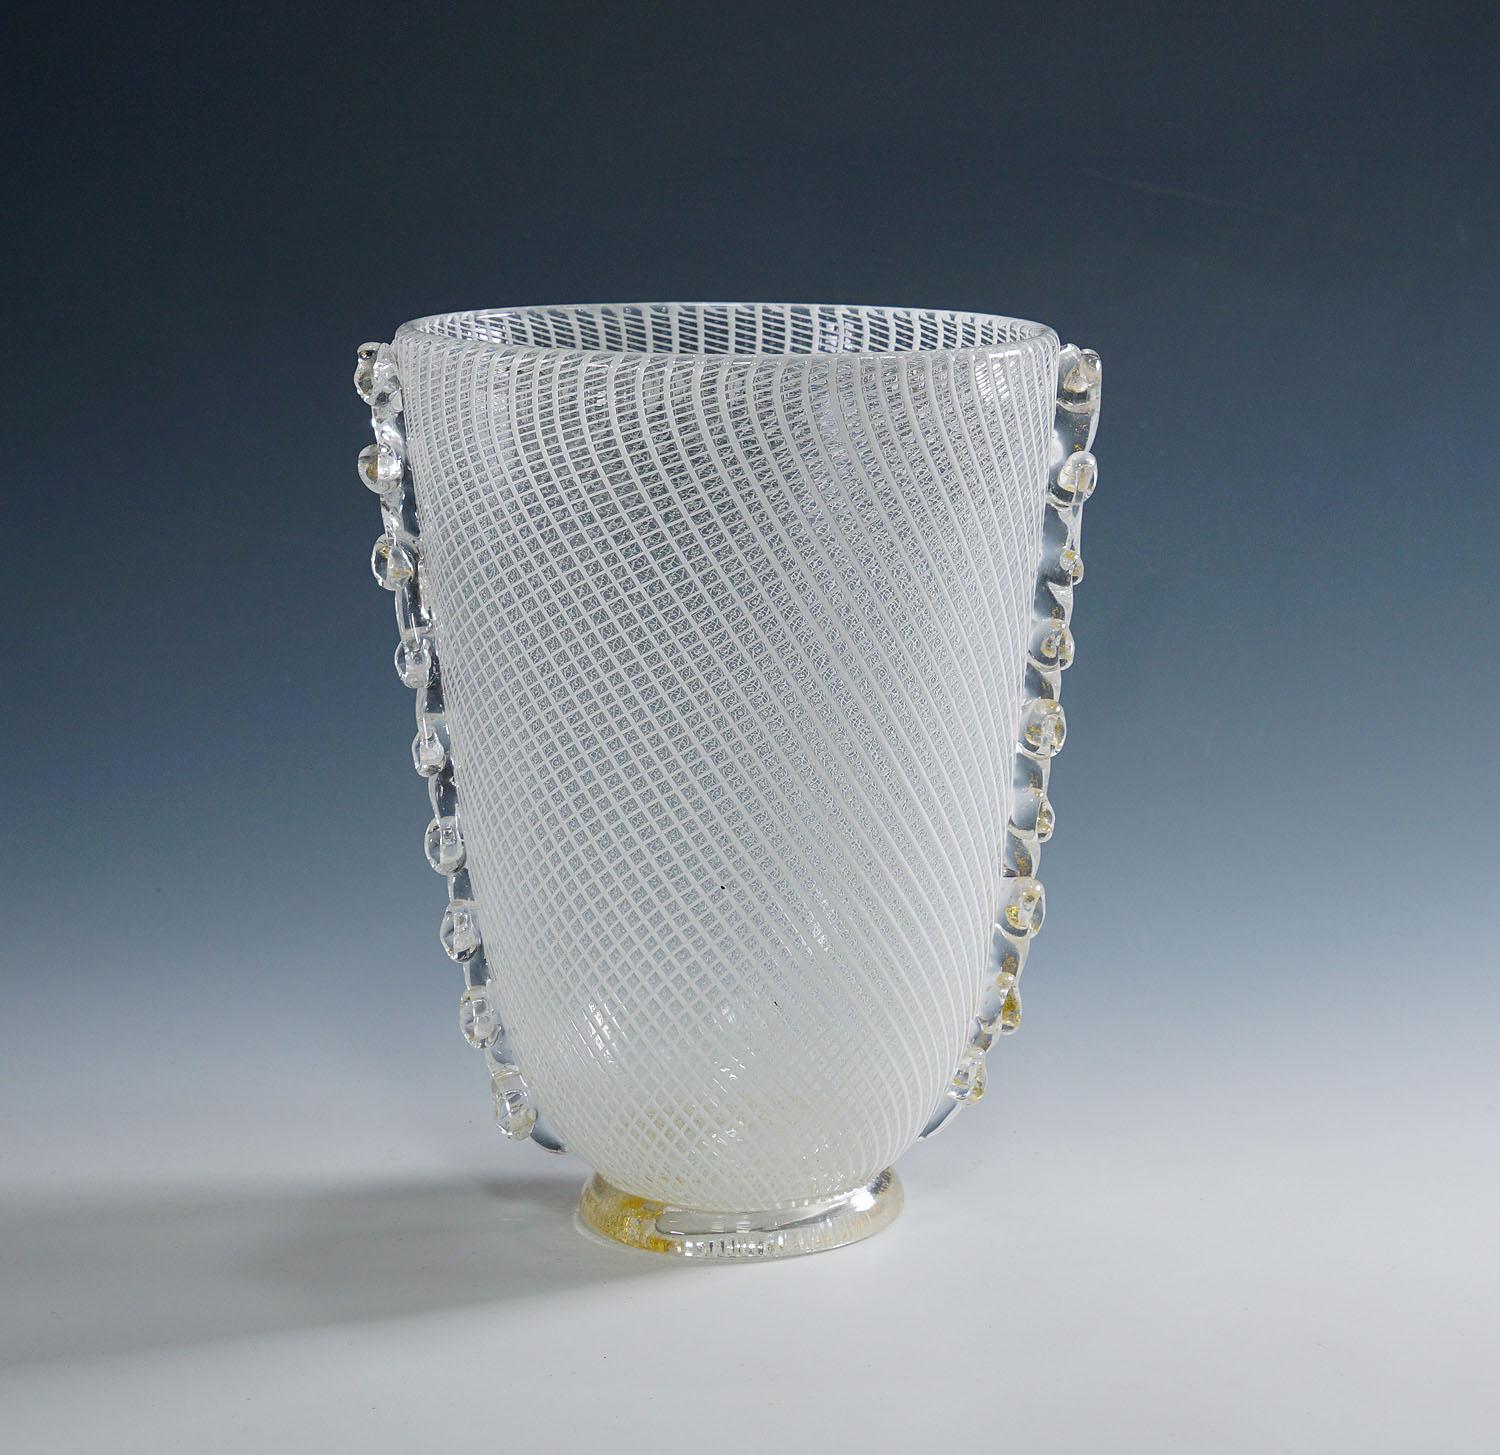 Reticello Art Glass Vase by Dino Martens for Aureliano Toso (attr.) Murano ca. 1950s

A vintage Murano art glass vase. Manufactured most probably by Aureliano Toso and designed by Dino Martens around 1950. Colorless glass with applied white